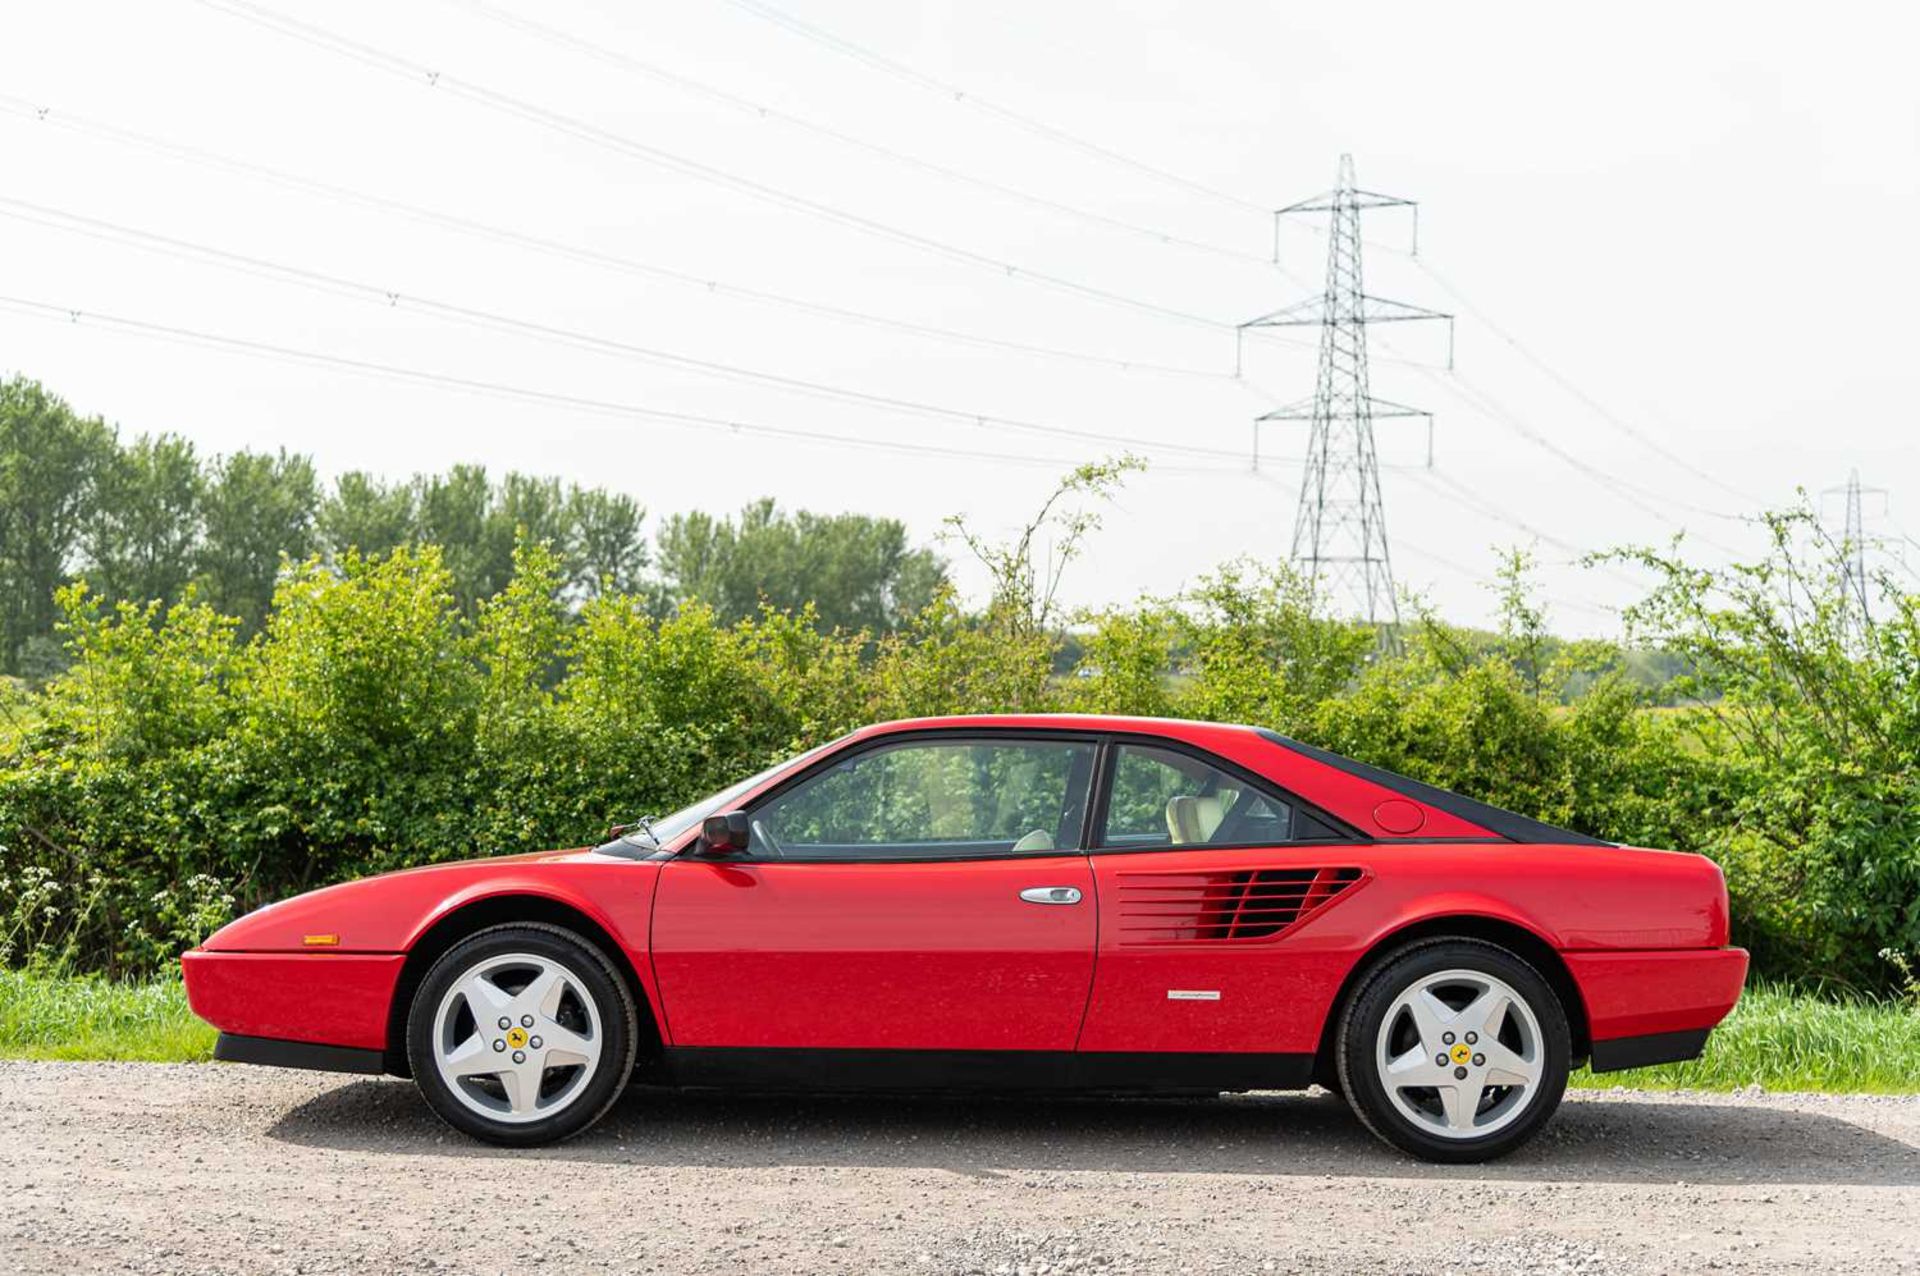 1988 Ferrari Mondial QV ***NO RESERVE*** Remained in the same ownership for nearly two decades finis - Image 13 of 91